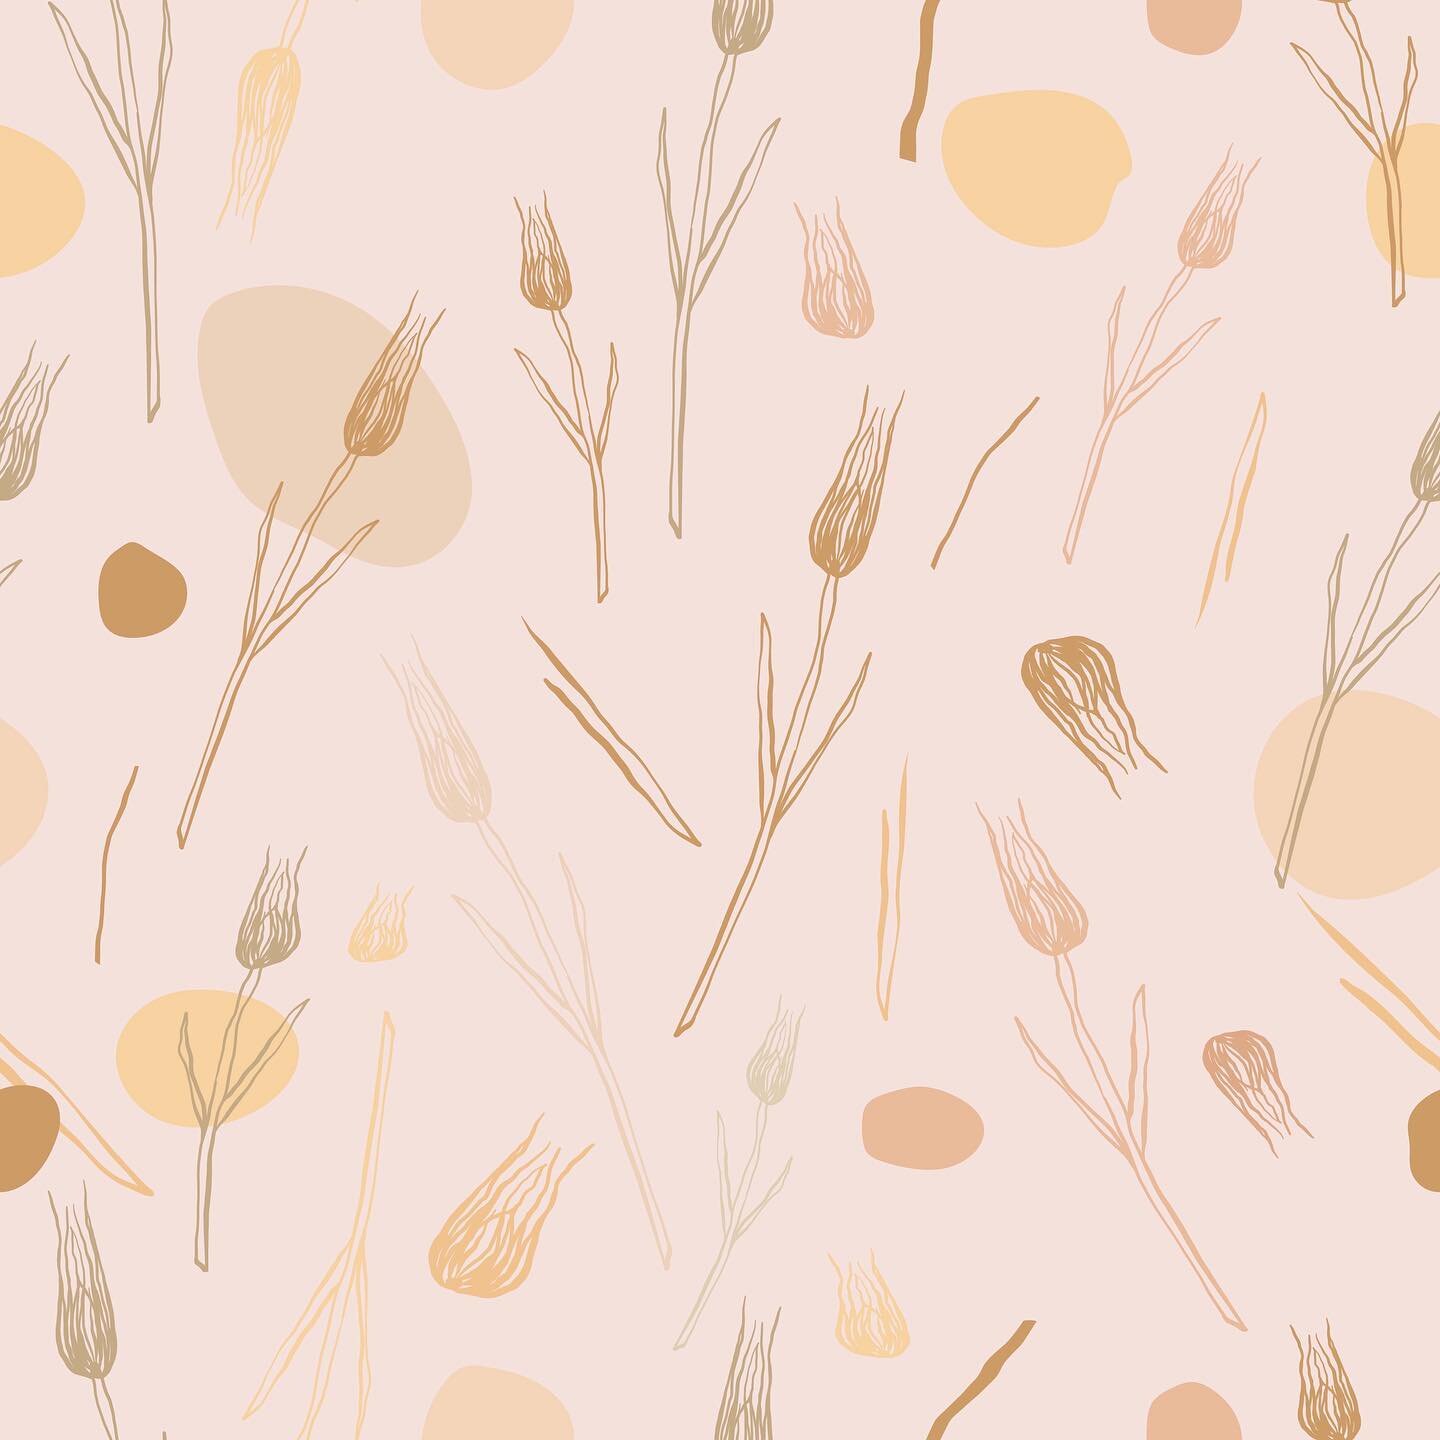 A light pattern to start the week off. Tossed wheat in a breezy field full of sun.
.
.
.
.
.

 #textiles #textiledesign #quiltfabric  #design #textiledesigner #surfacepatterndesign #fabricdesign #pattern #print #surfacedesigner #illustration #artlice